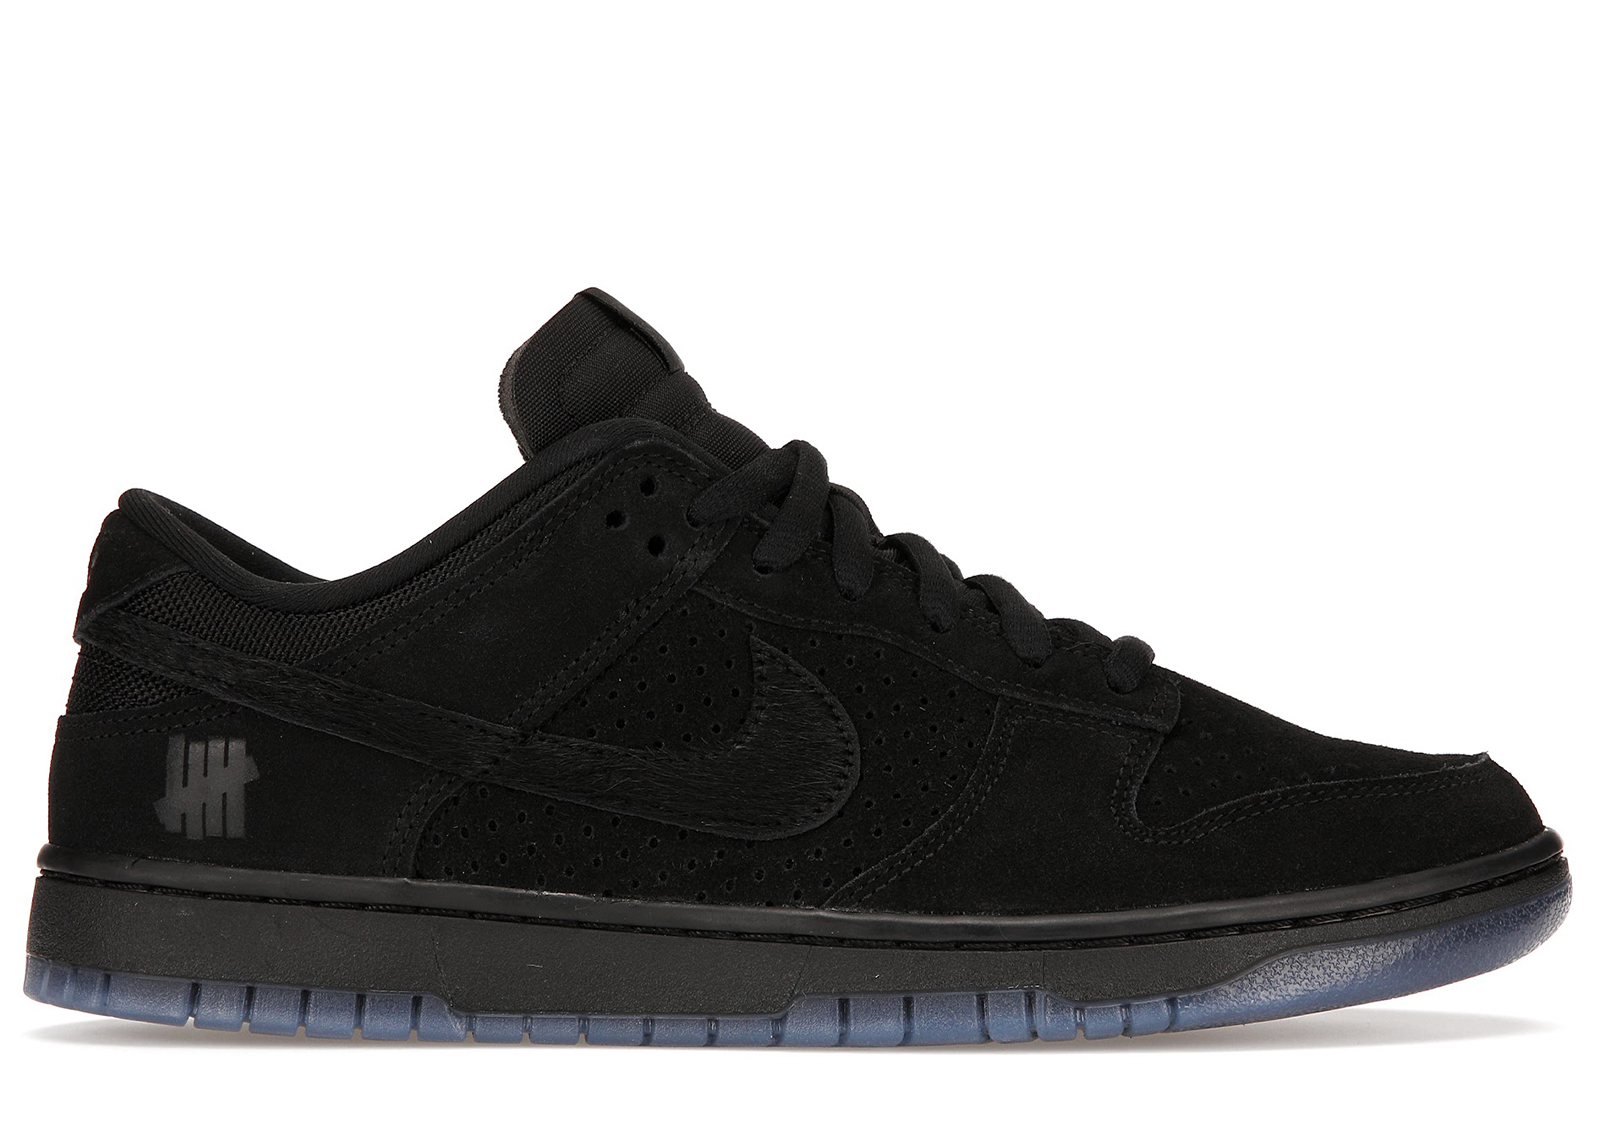 NIKE DUNK LOW SP UNDEFEATED